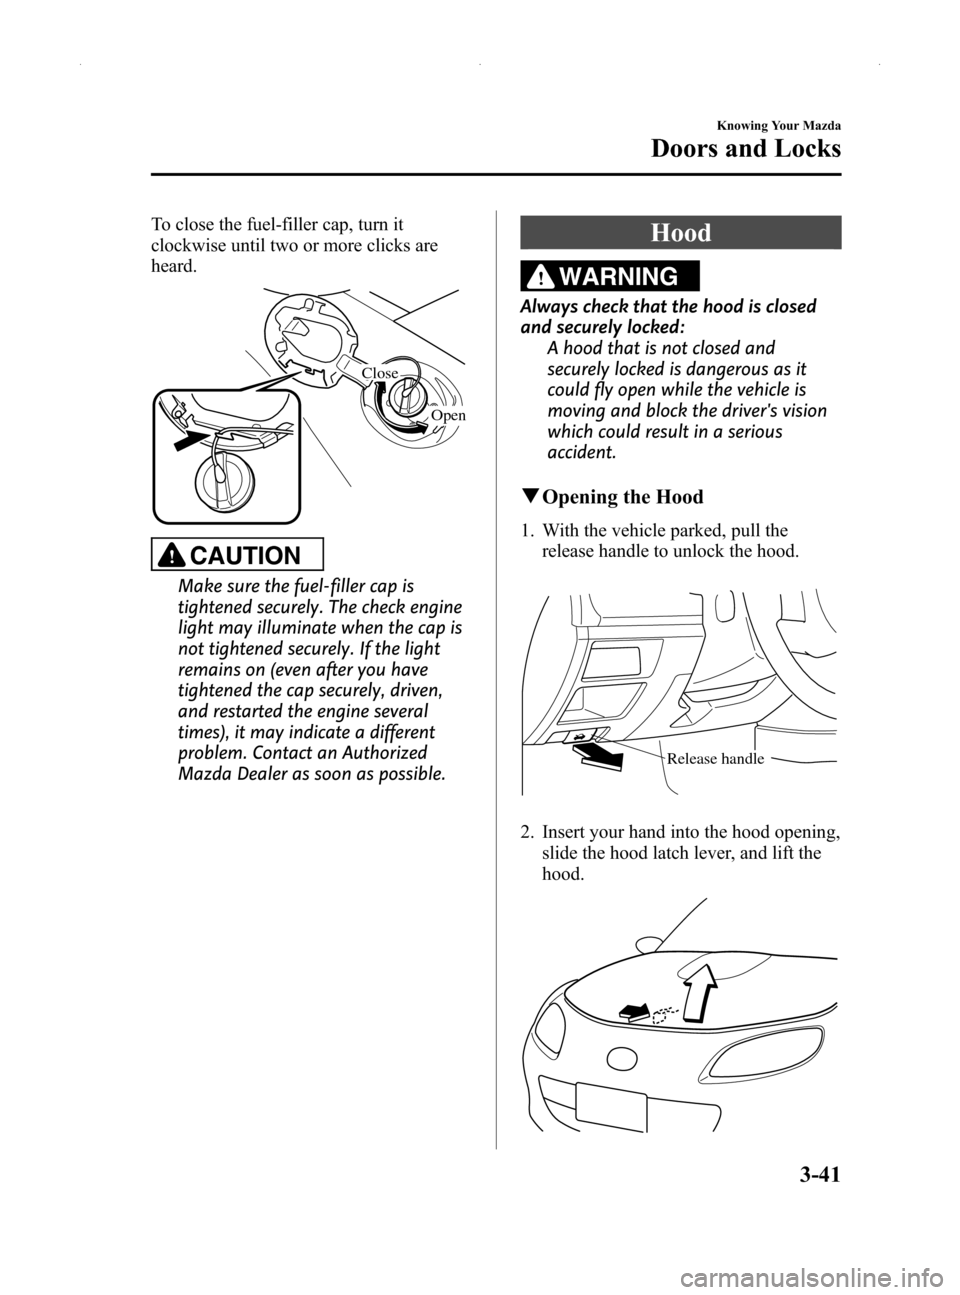 MAZDA MODEL MX-5 2014  Owners Manual (in English) Black plate (95,1)
To close the fuel-filler cap, turn it
clockwise until two or more clicks are
heard.
Close
Open
CAUTION
Make sure the fuel-filler cap is
tightened securely. The check engine
light ma